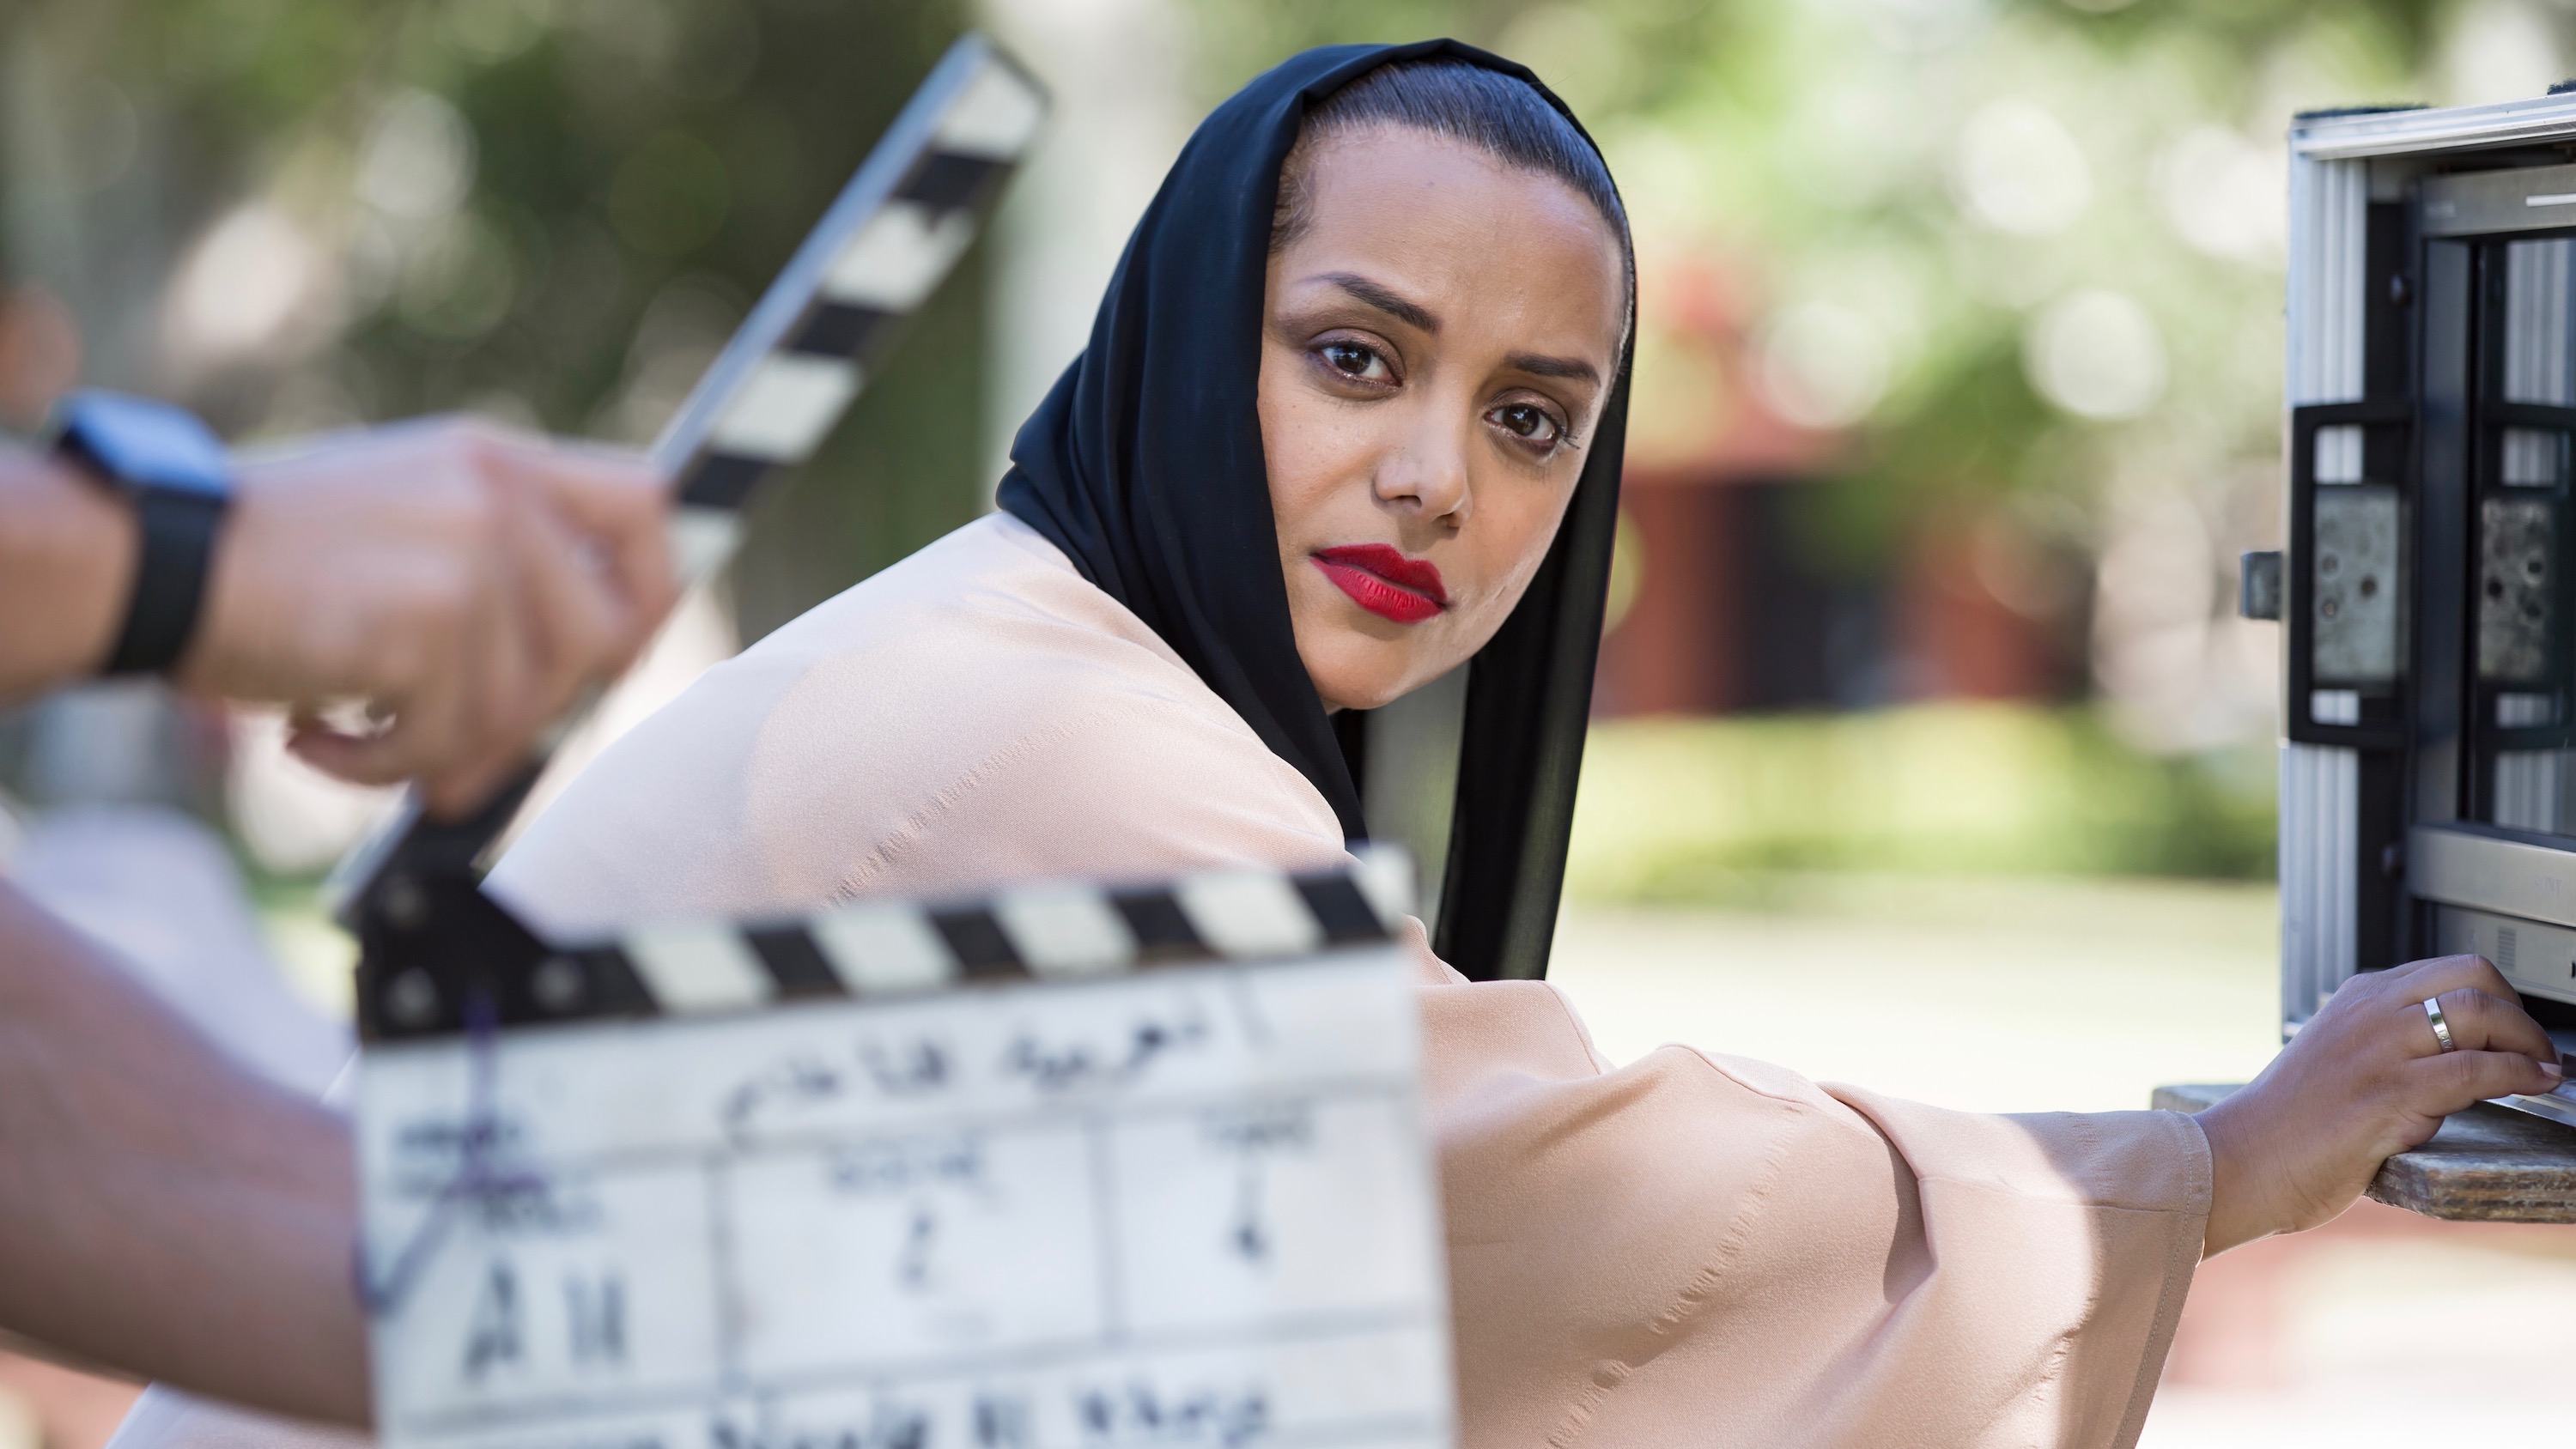 Woman in hijab looks at camera with clapperboard in foreground